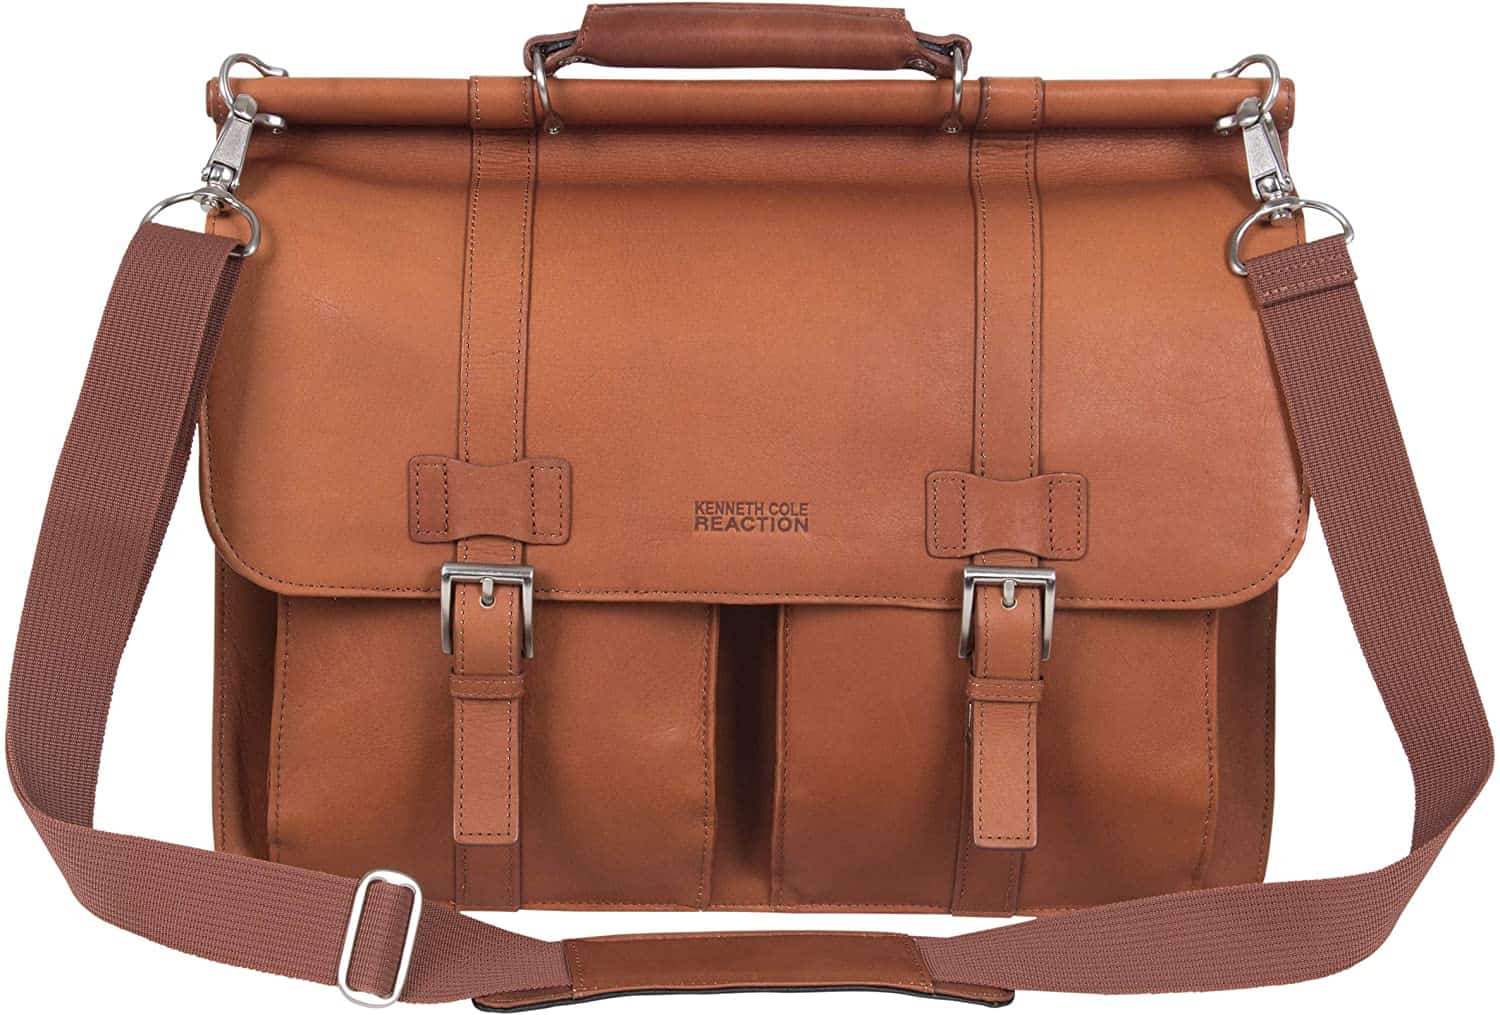 Kenneth Cole Reaction Colombian Leather Laptop Bag Review